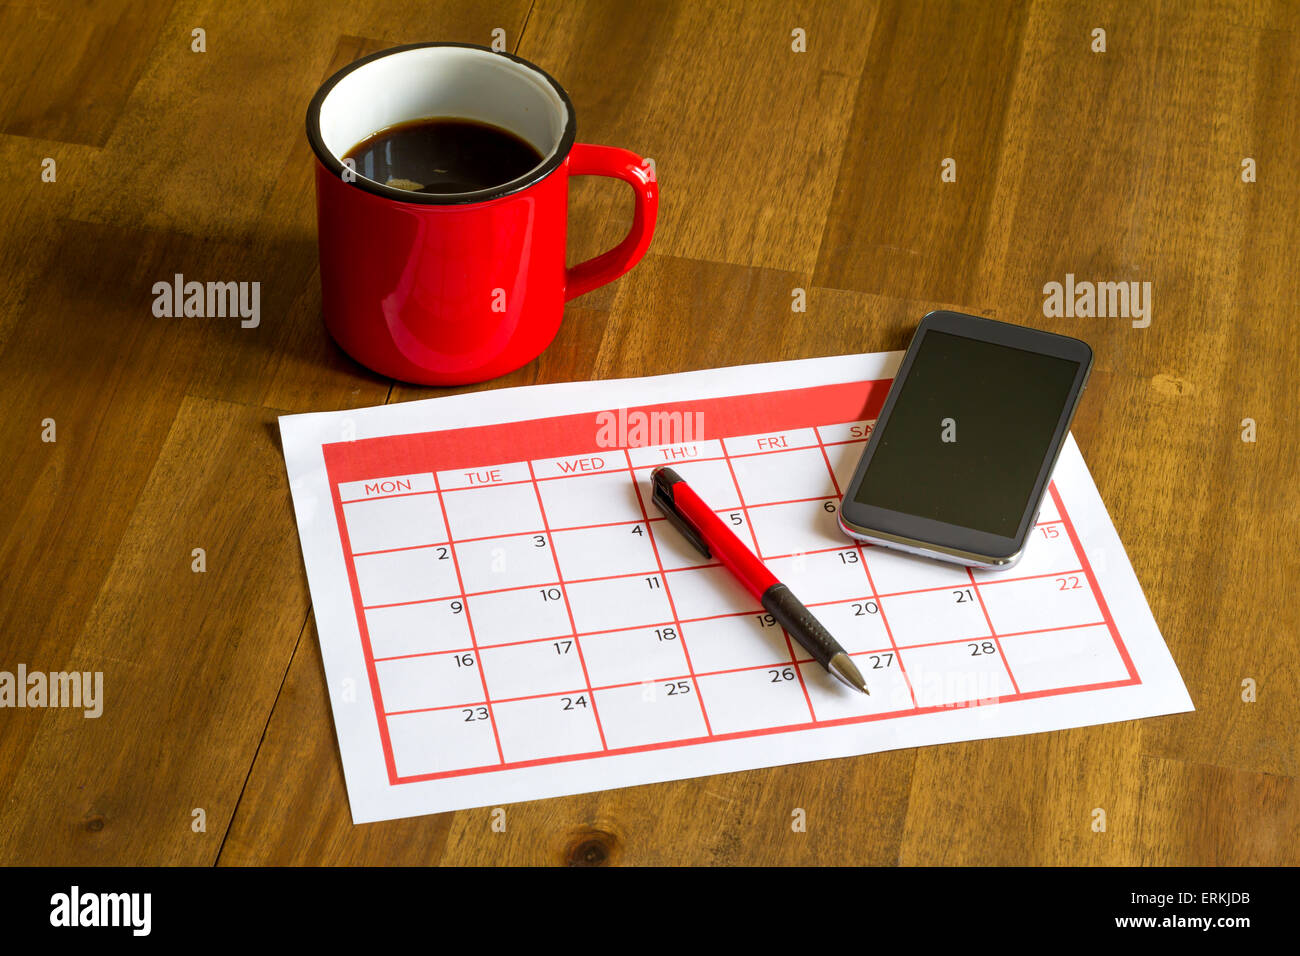 Organizing monthly activities and appointments in the calendar Stock Photo